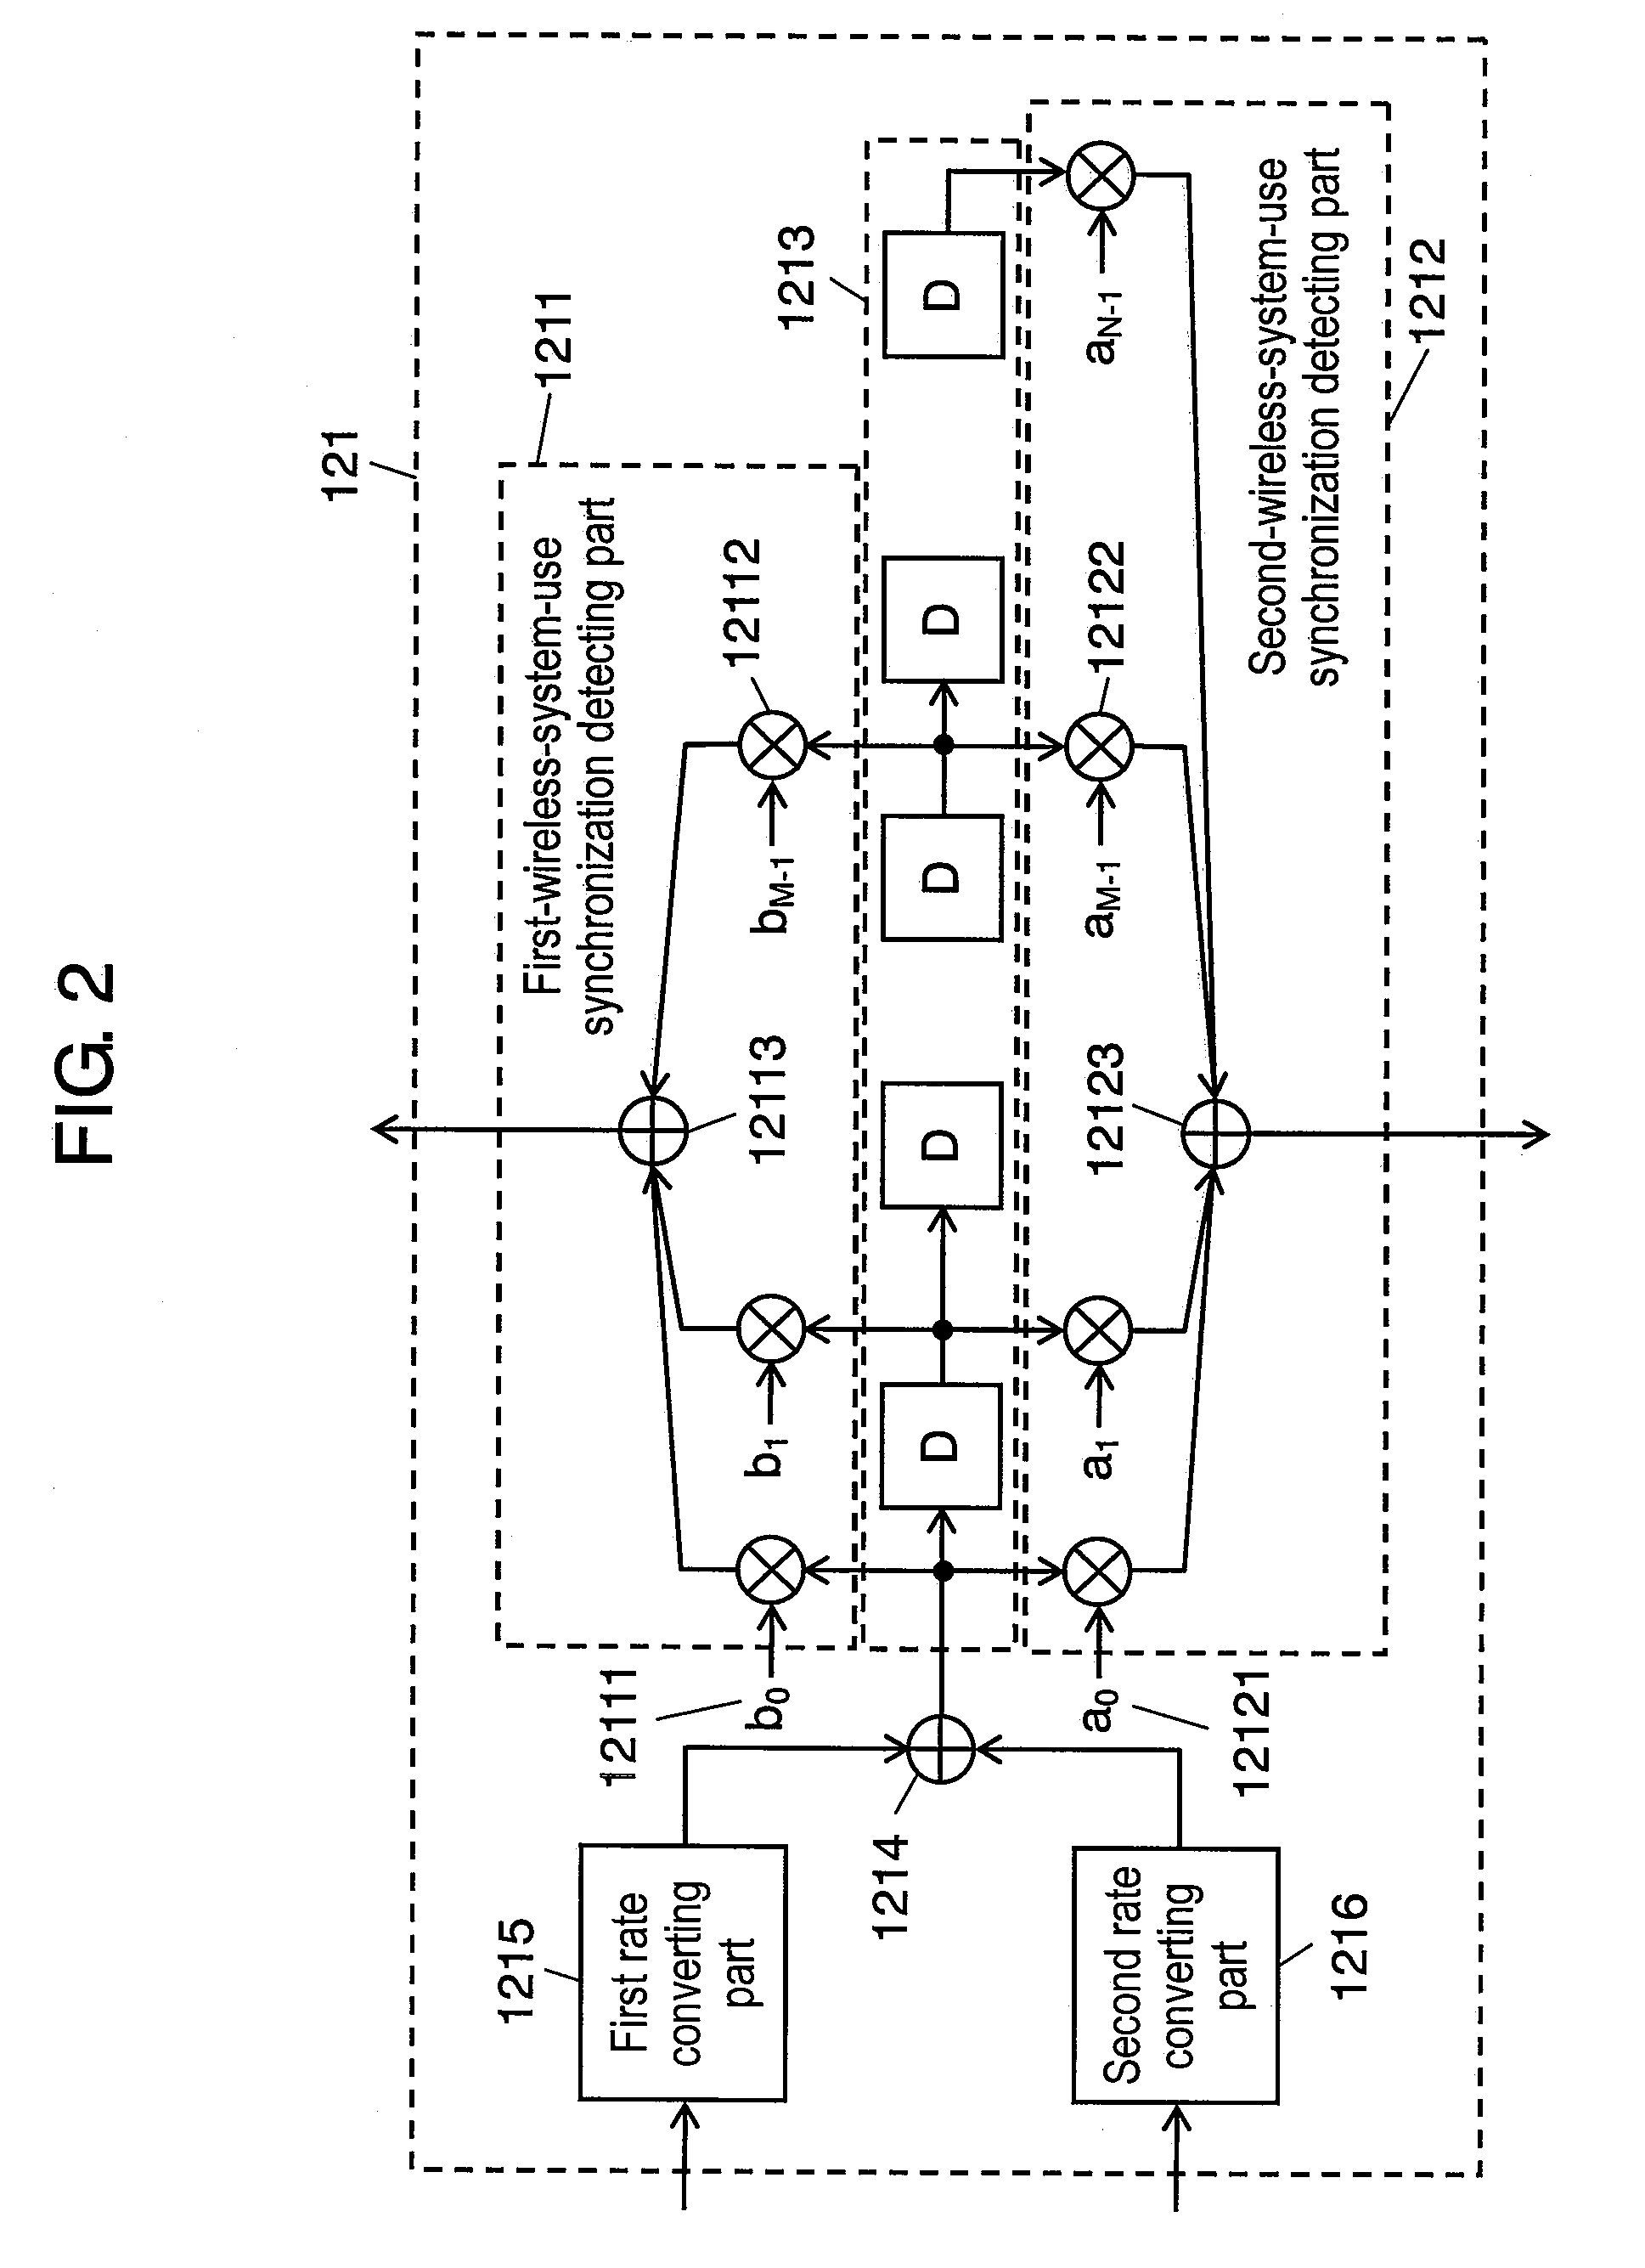 Synchronization detecting circuit and multimode wireless communication apparatus